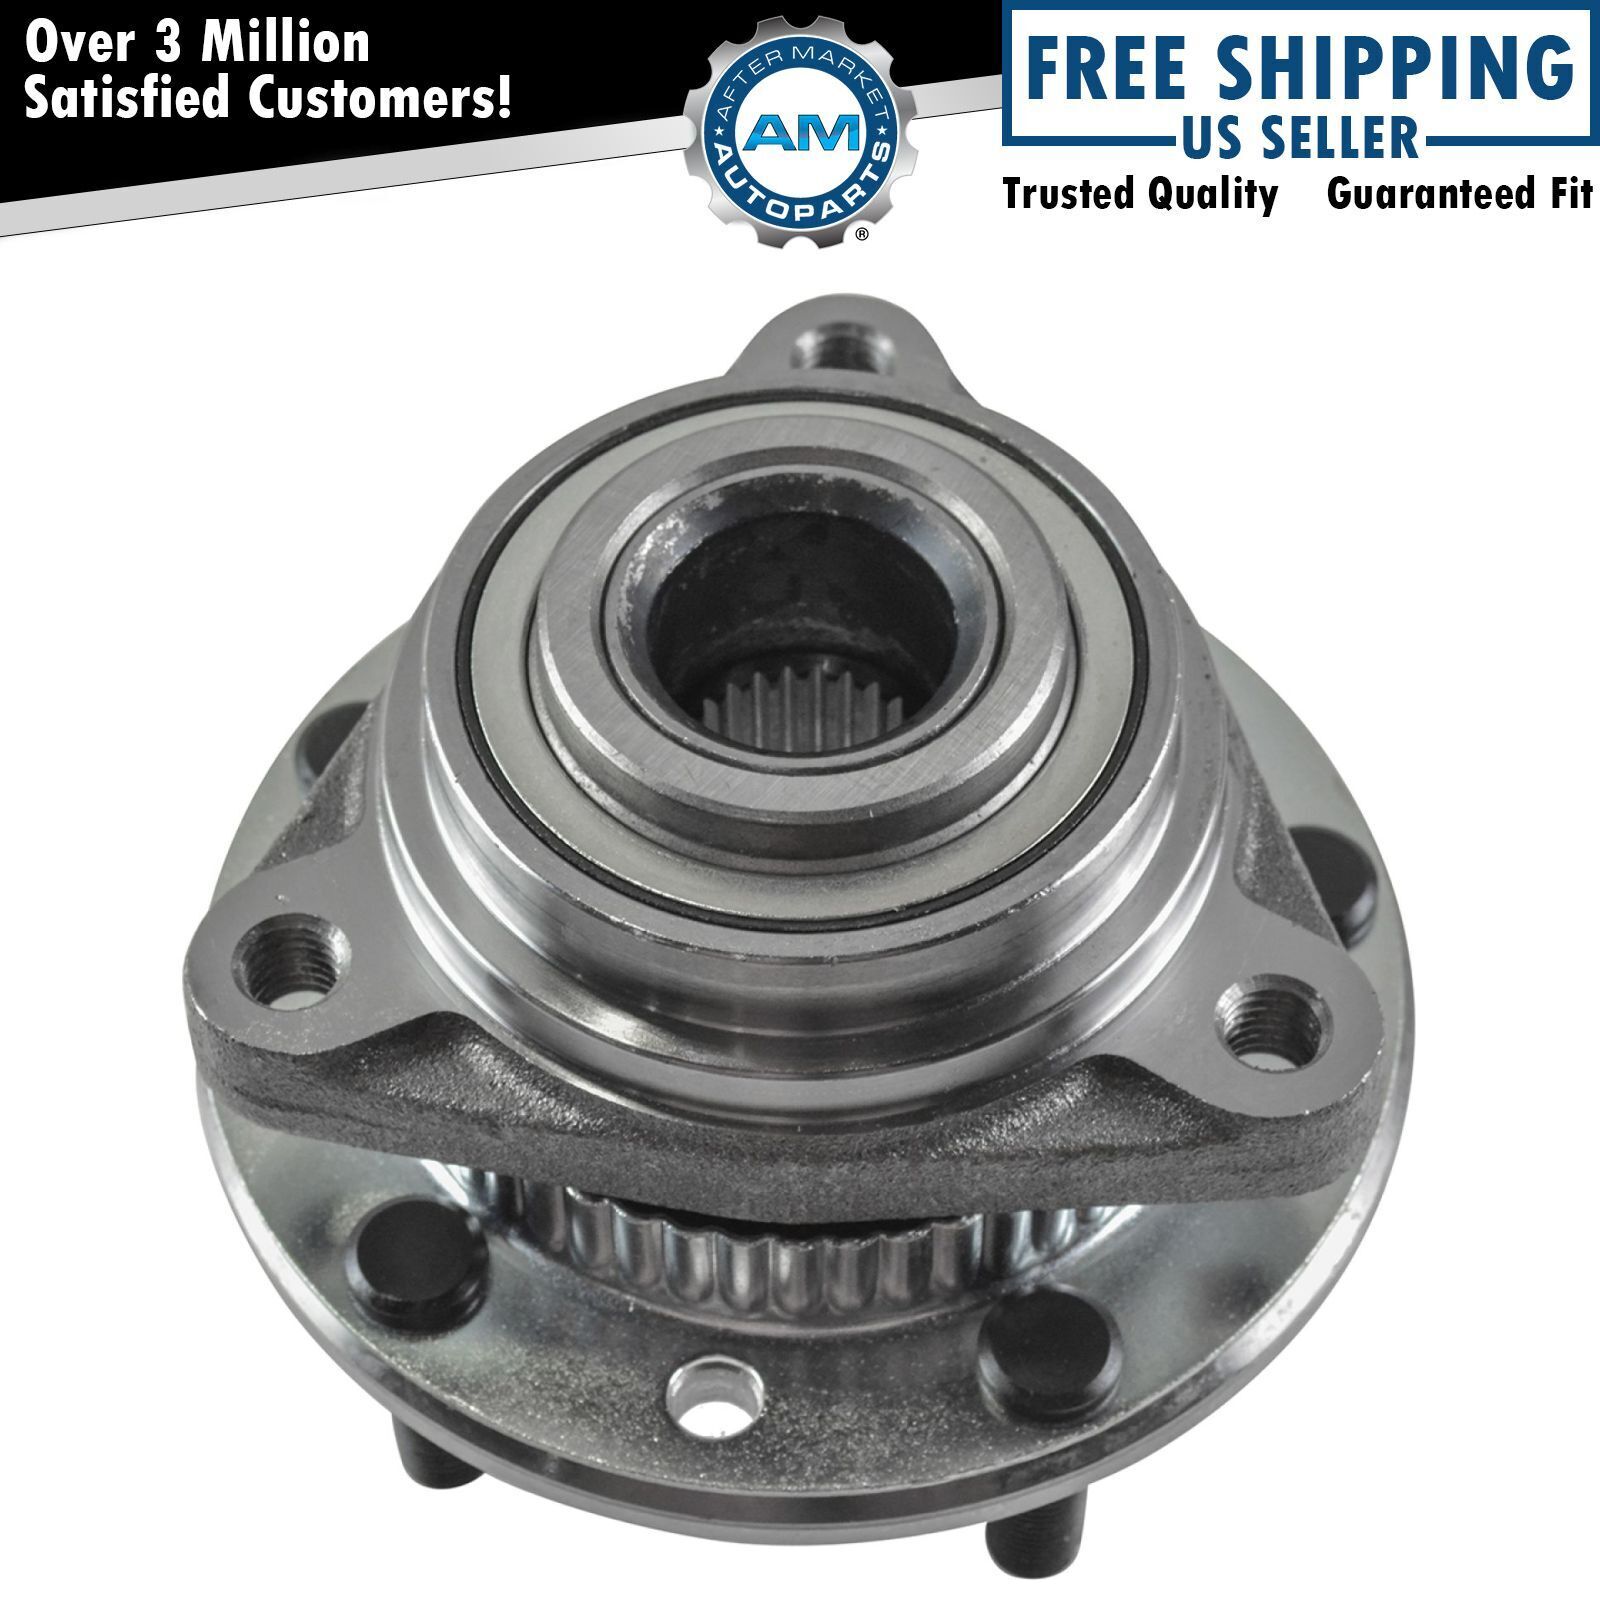 Front Wheel Hub & Bearing for Chevy GMC Pickup Truck S10 Olds 4x4 4WD